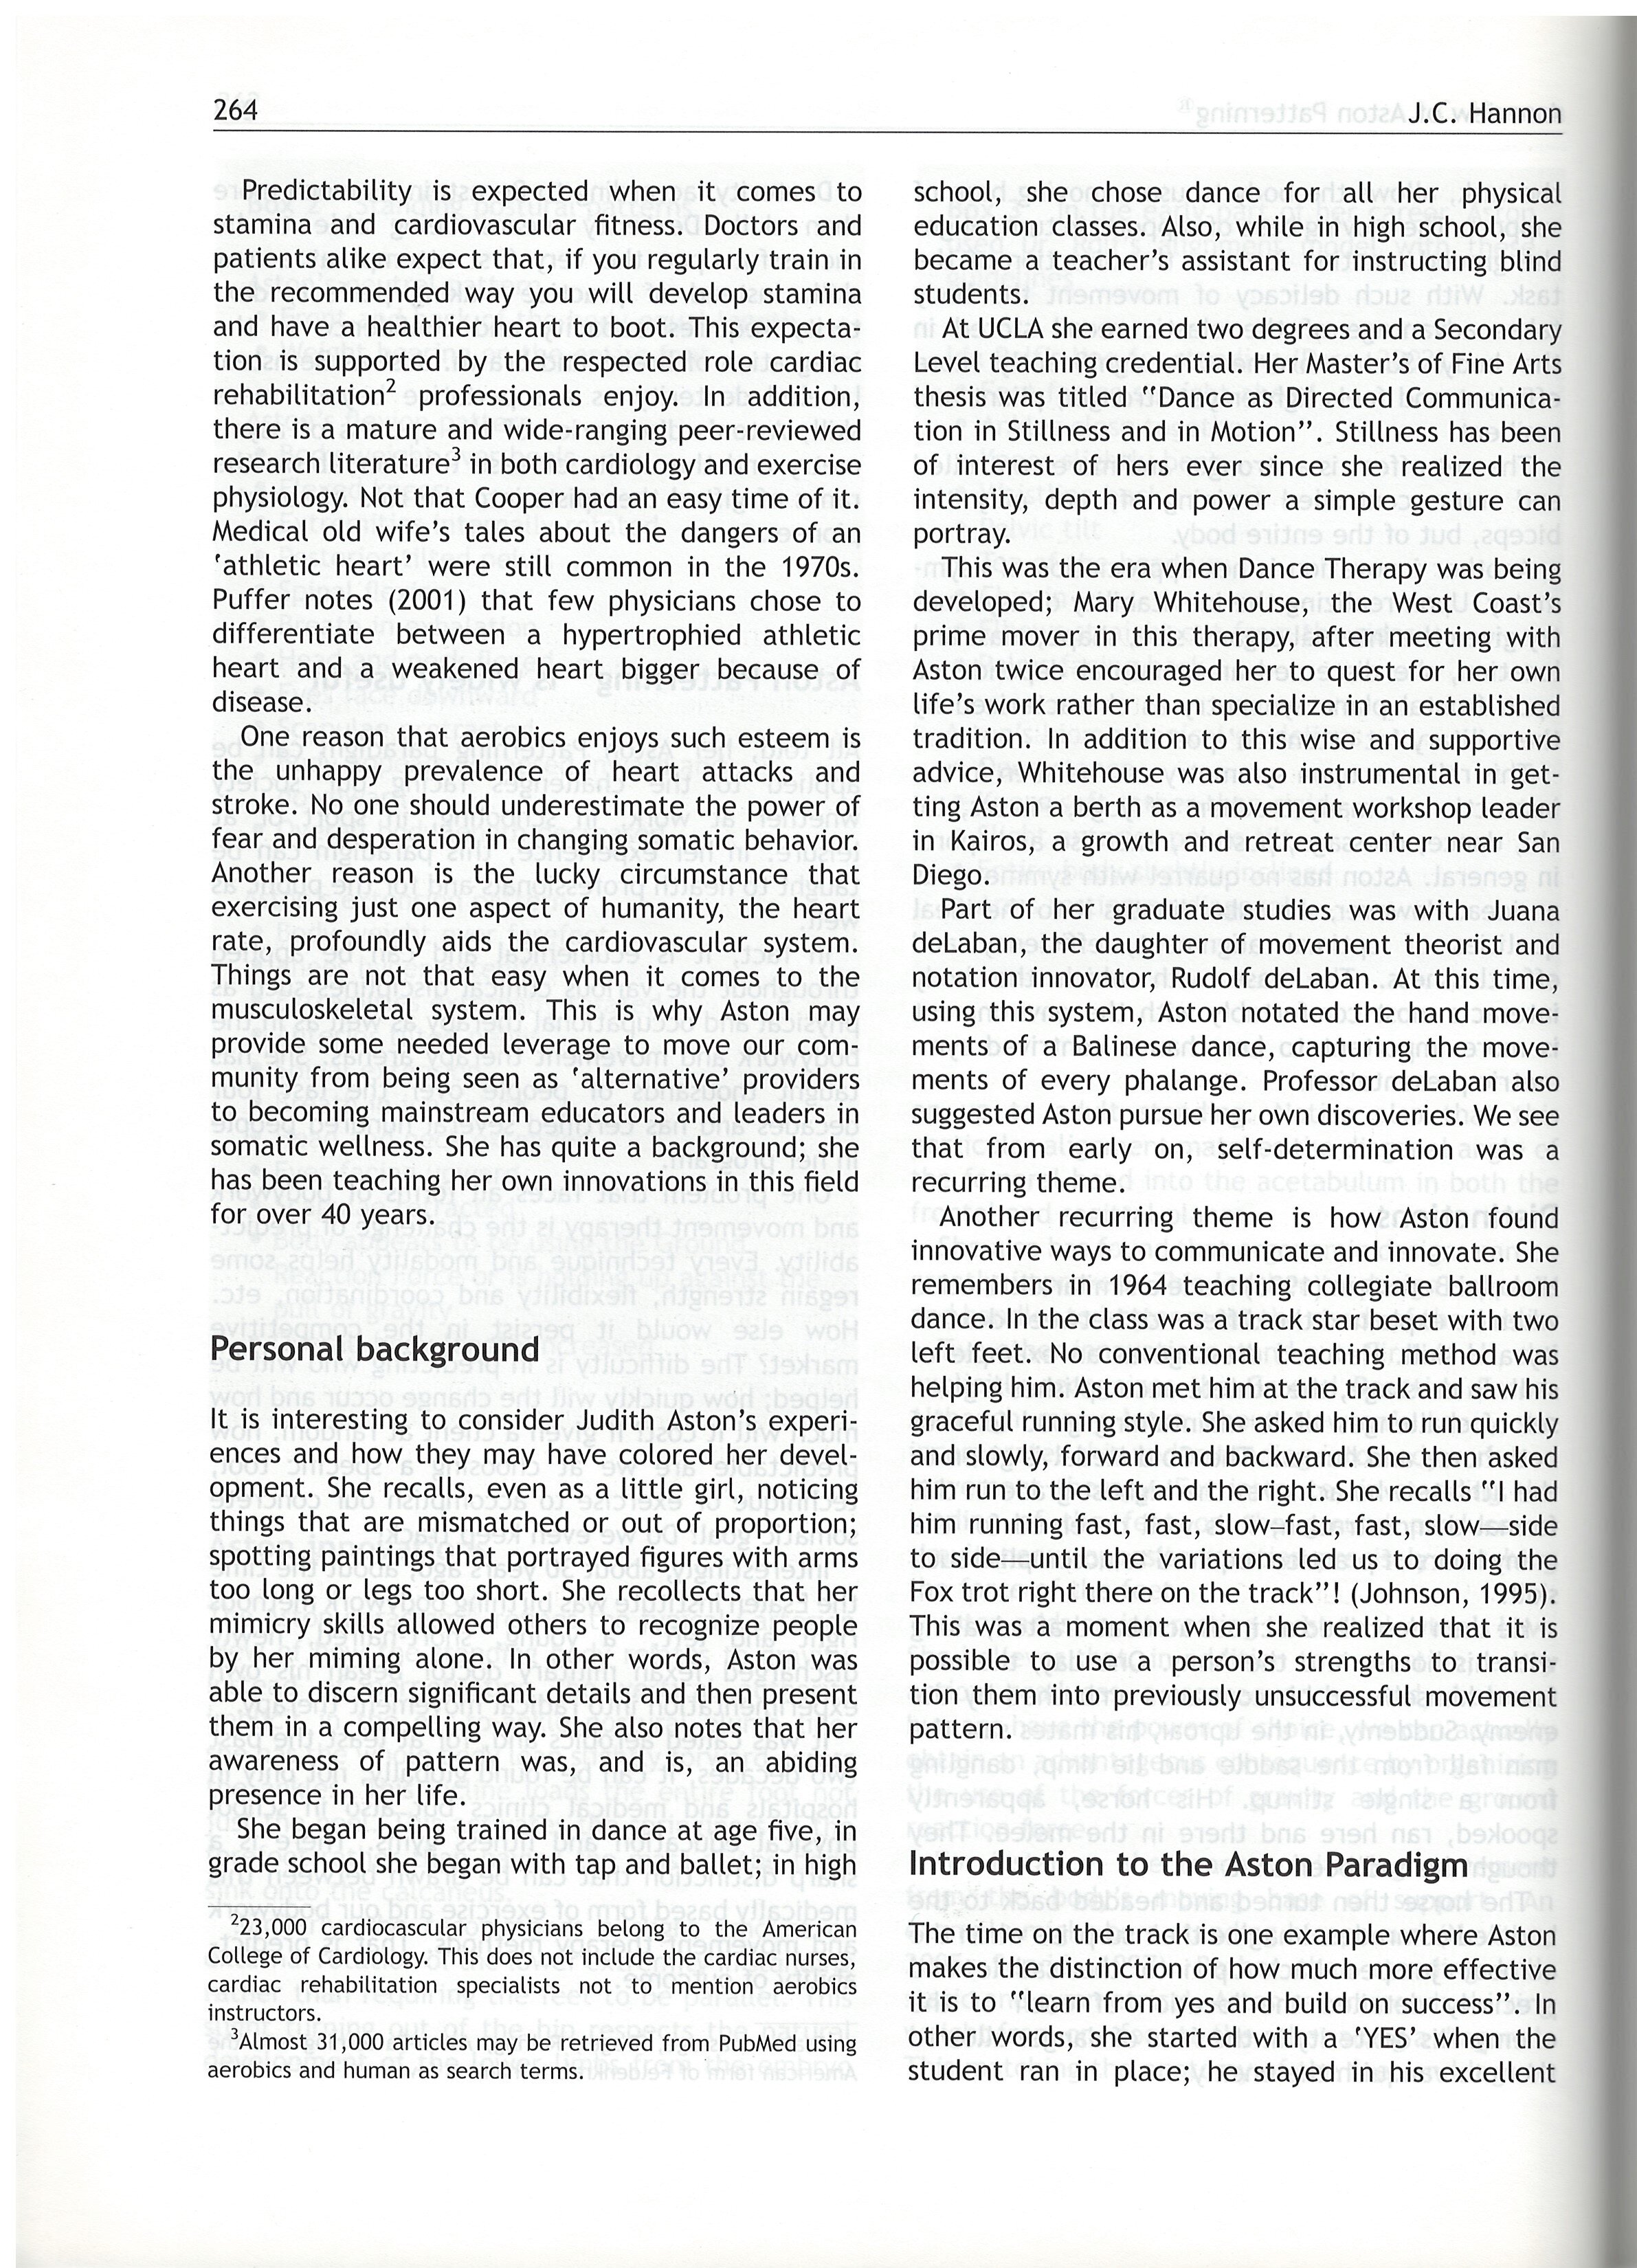 Journal of Bodywork and Movement Therapies 2005.5.jpg